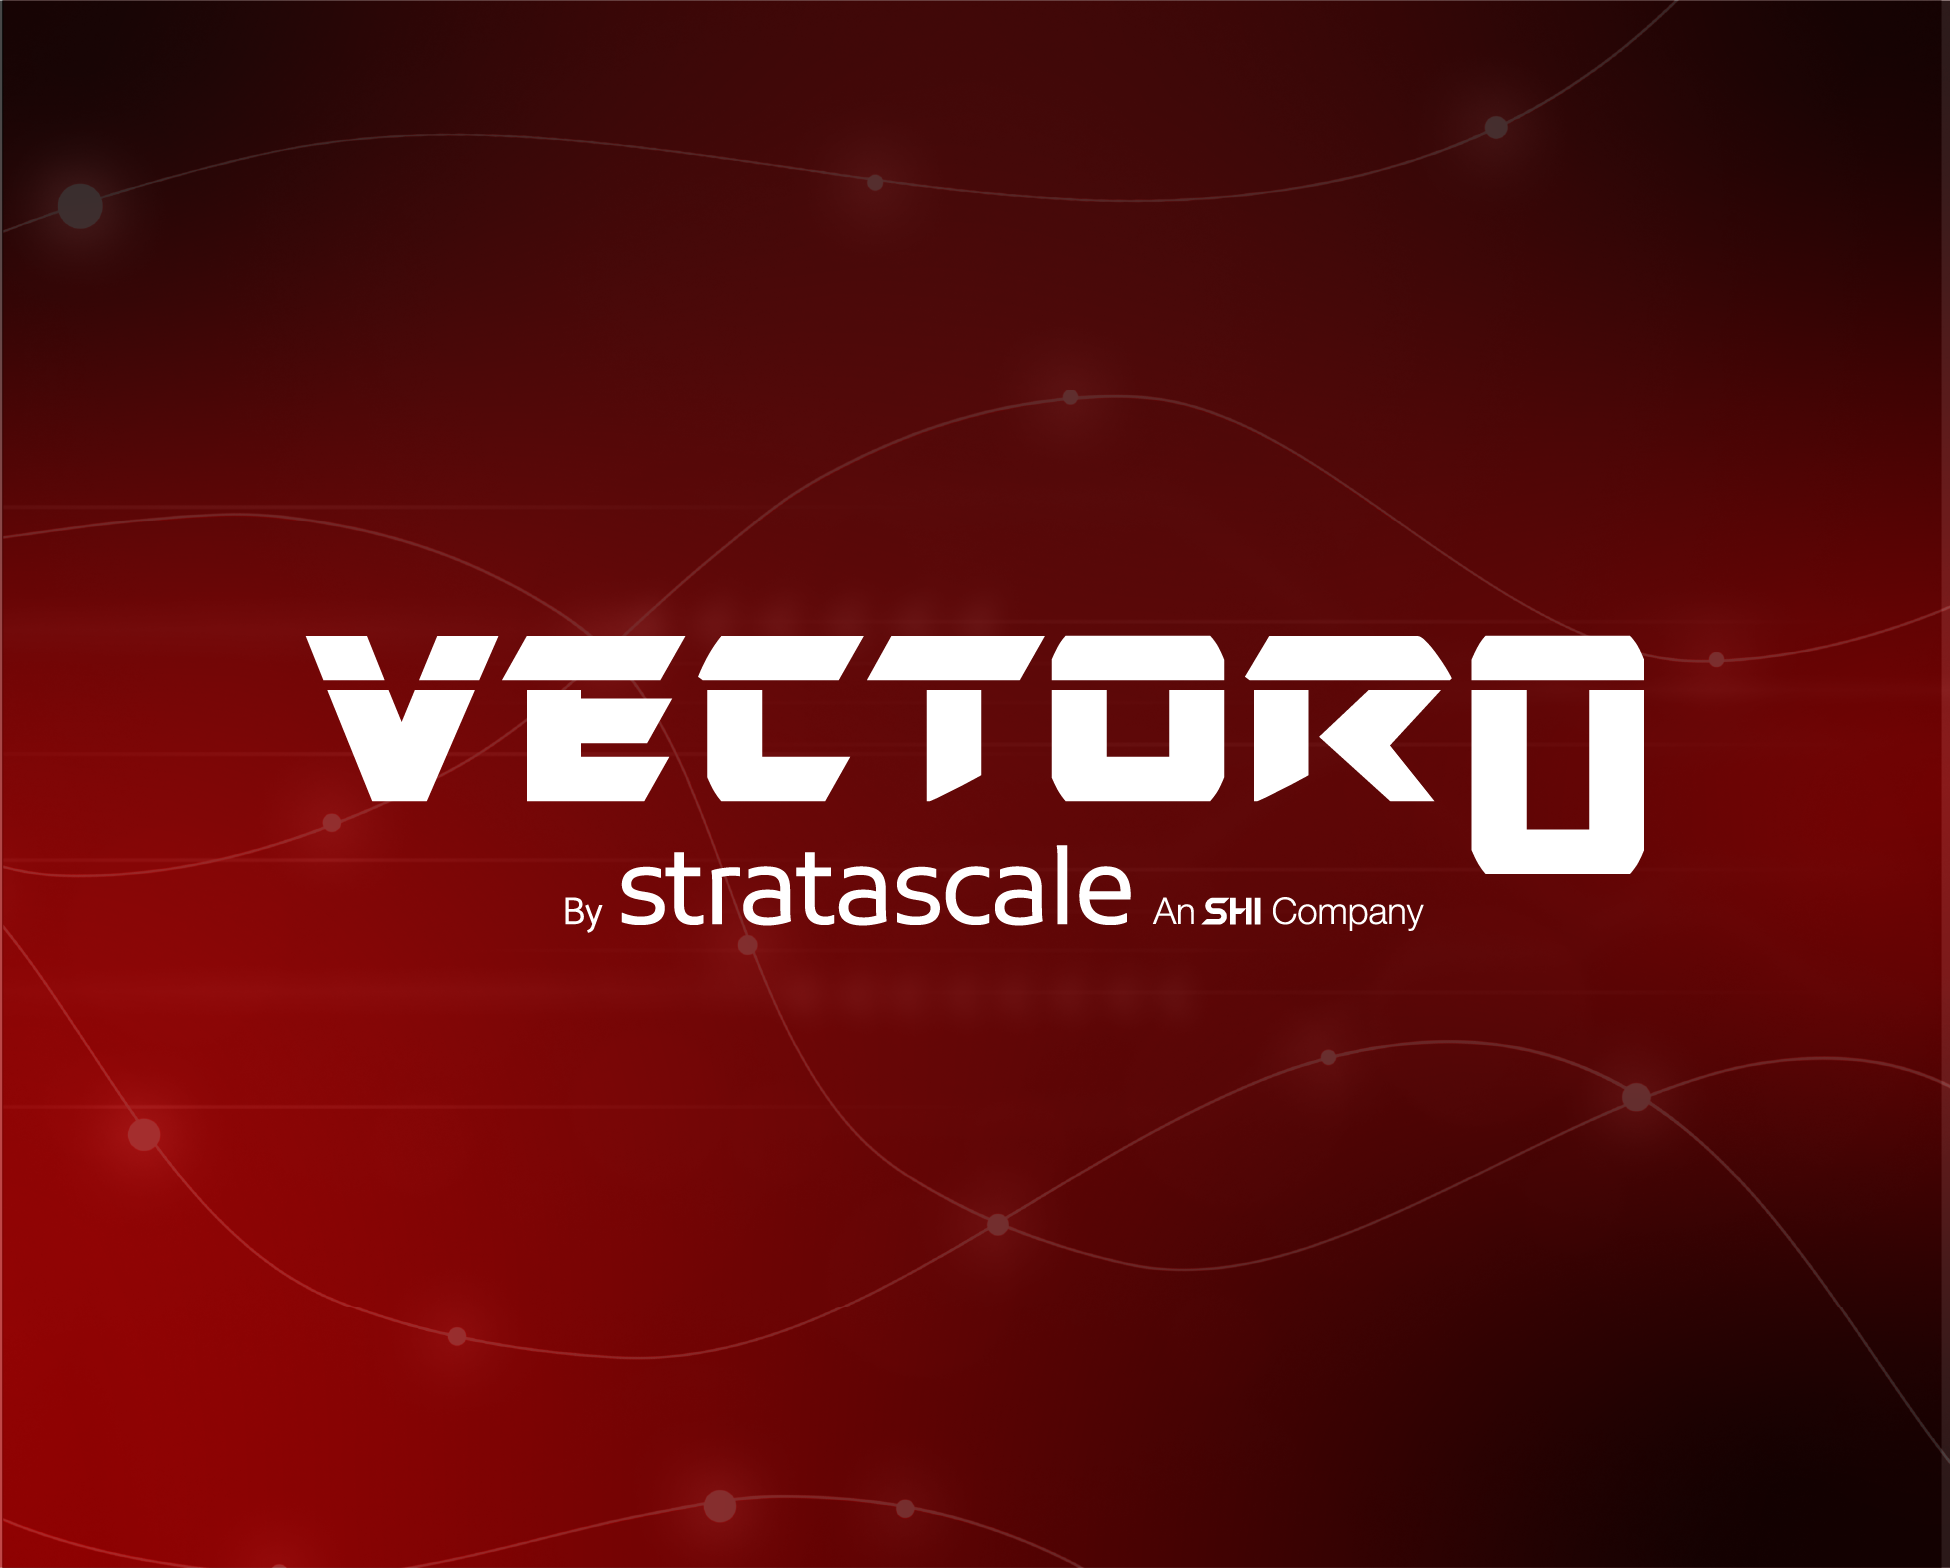 Stratascale Expands Cybersecurity Capabilities with Acquisition of Vector0